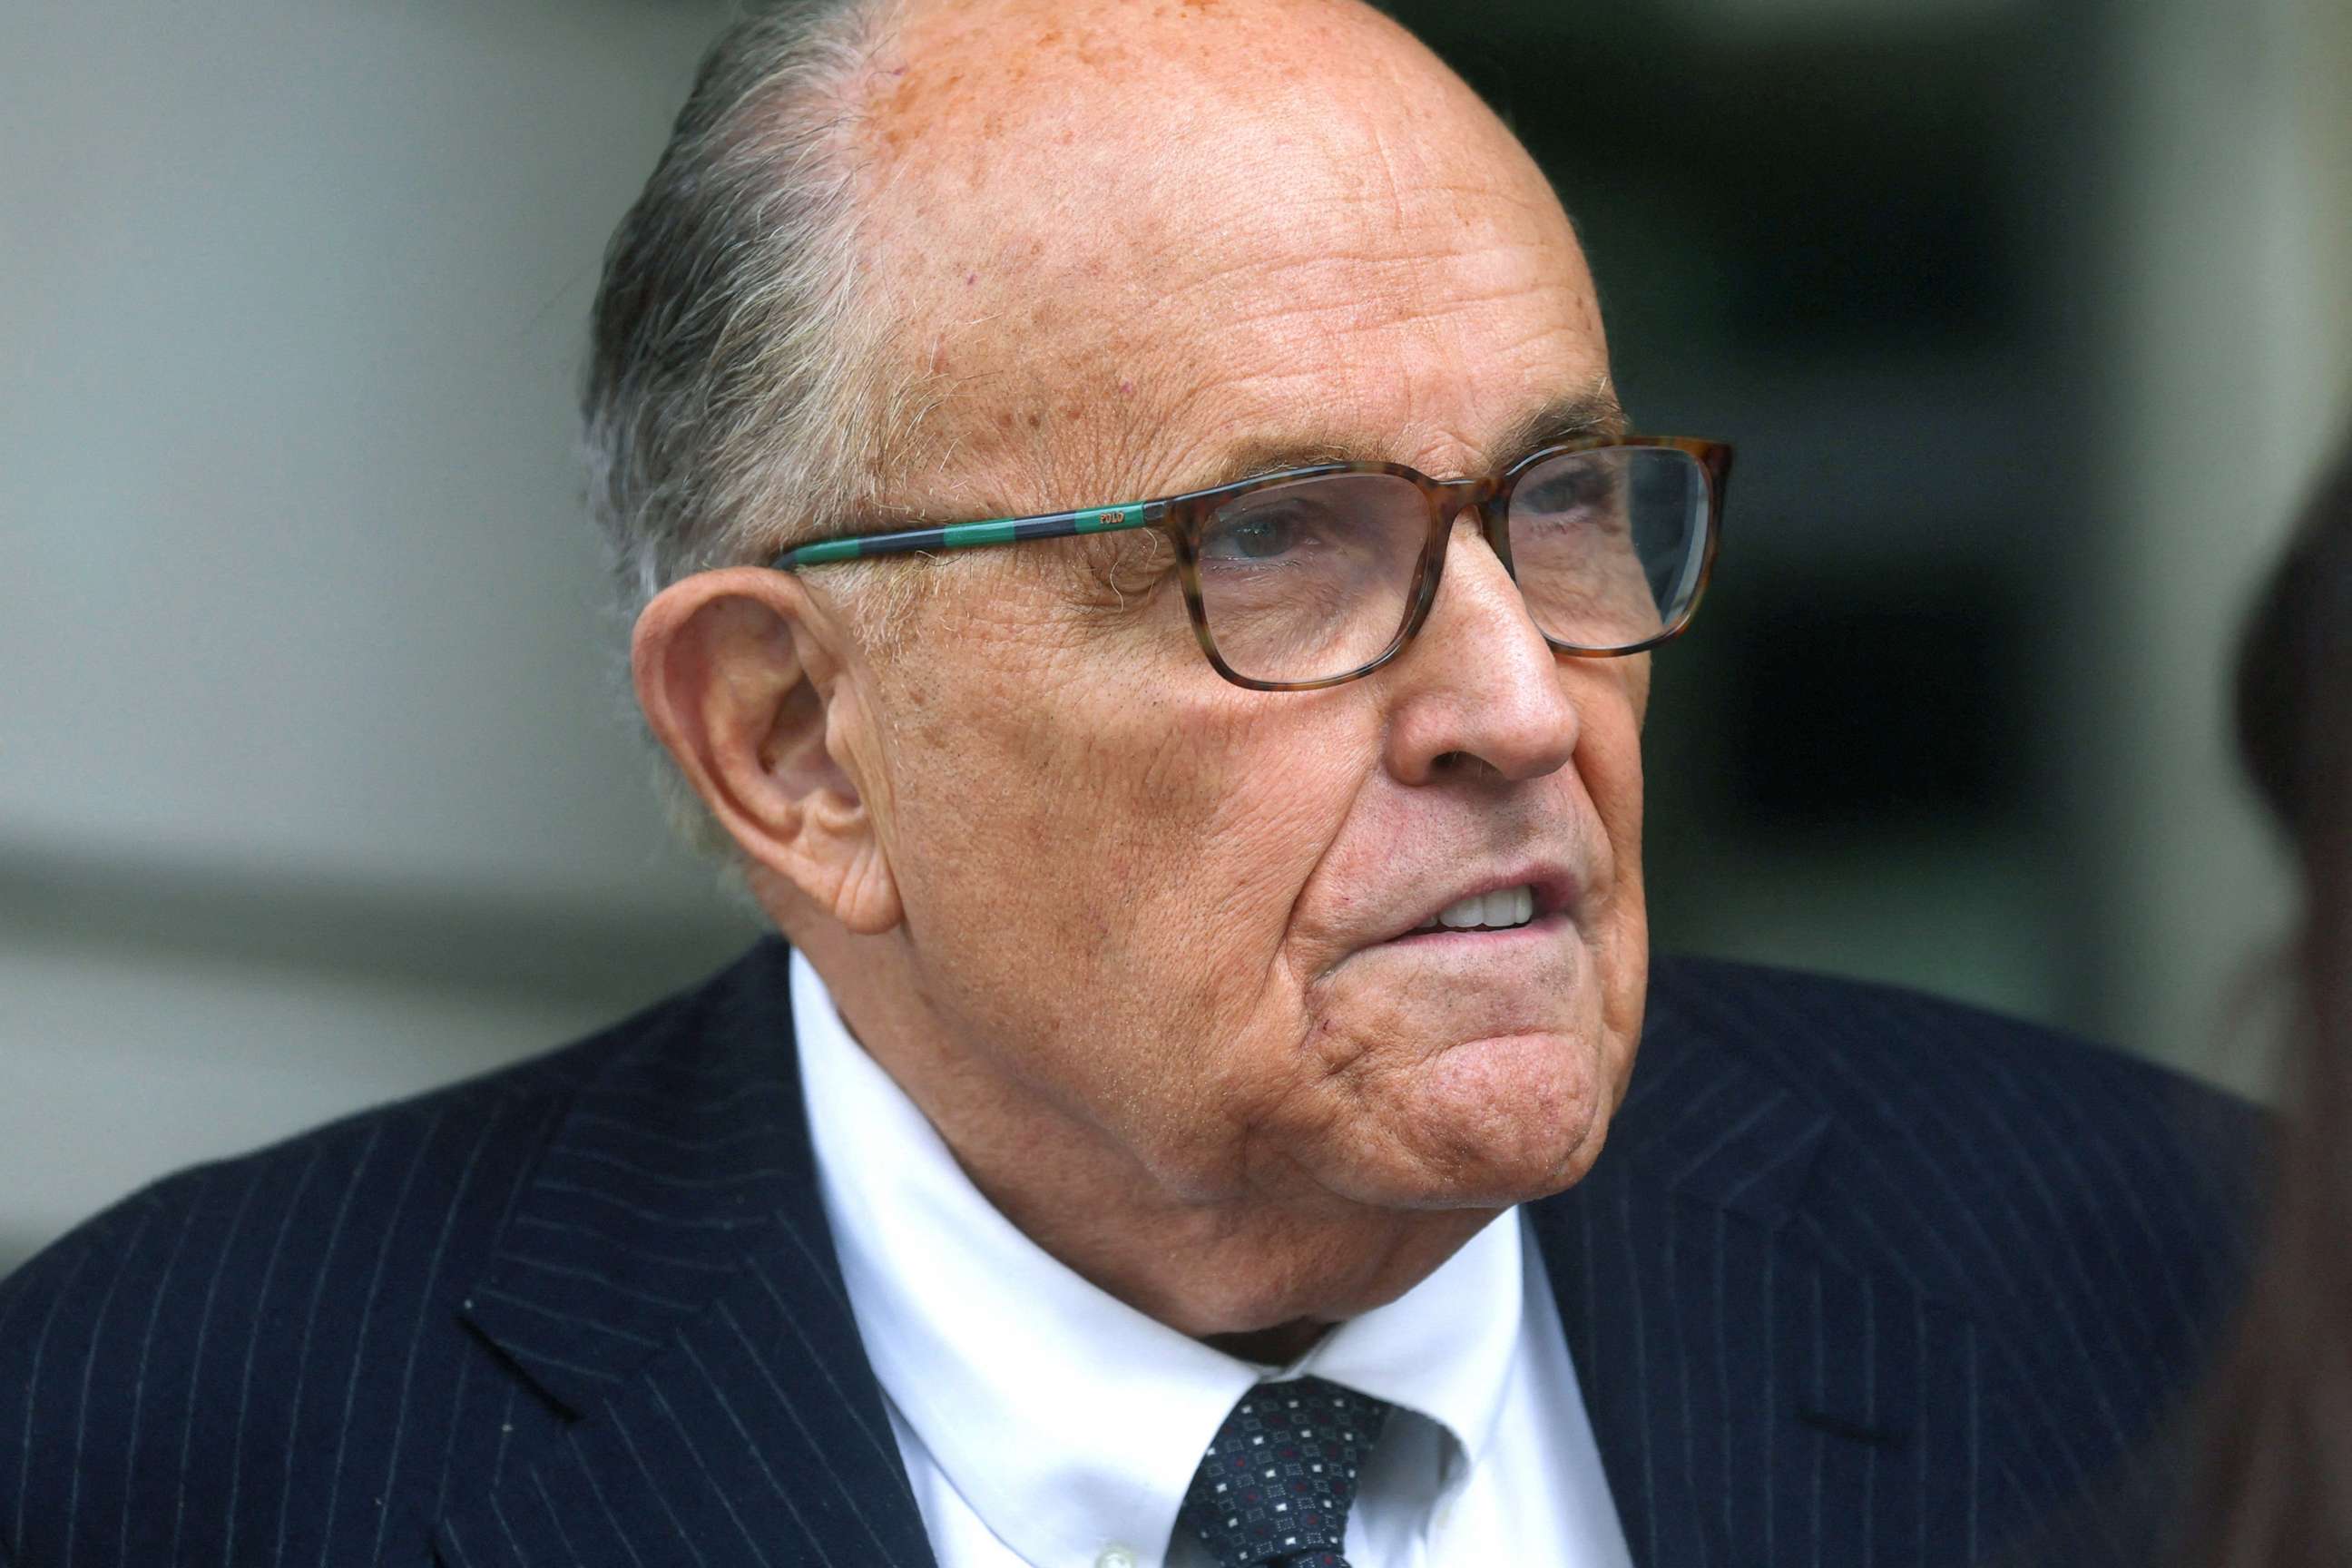 PHOTO: Former New York City Mayor Rudy Giuliani, an attorney for former President Donald Trump during challenges to the 2020 election results, exits U.S. District Court after attending a hearing at the federal courthouse in Washington, D.C., May 19, 2023.